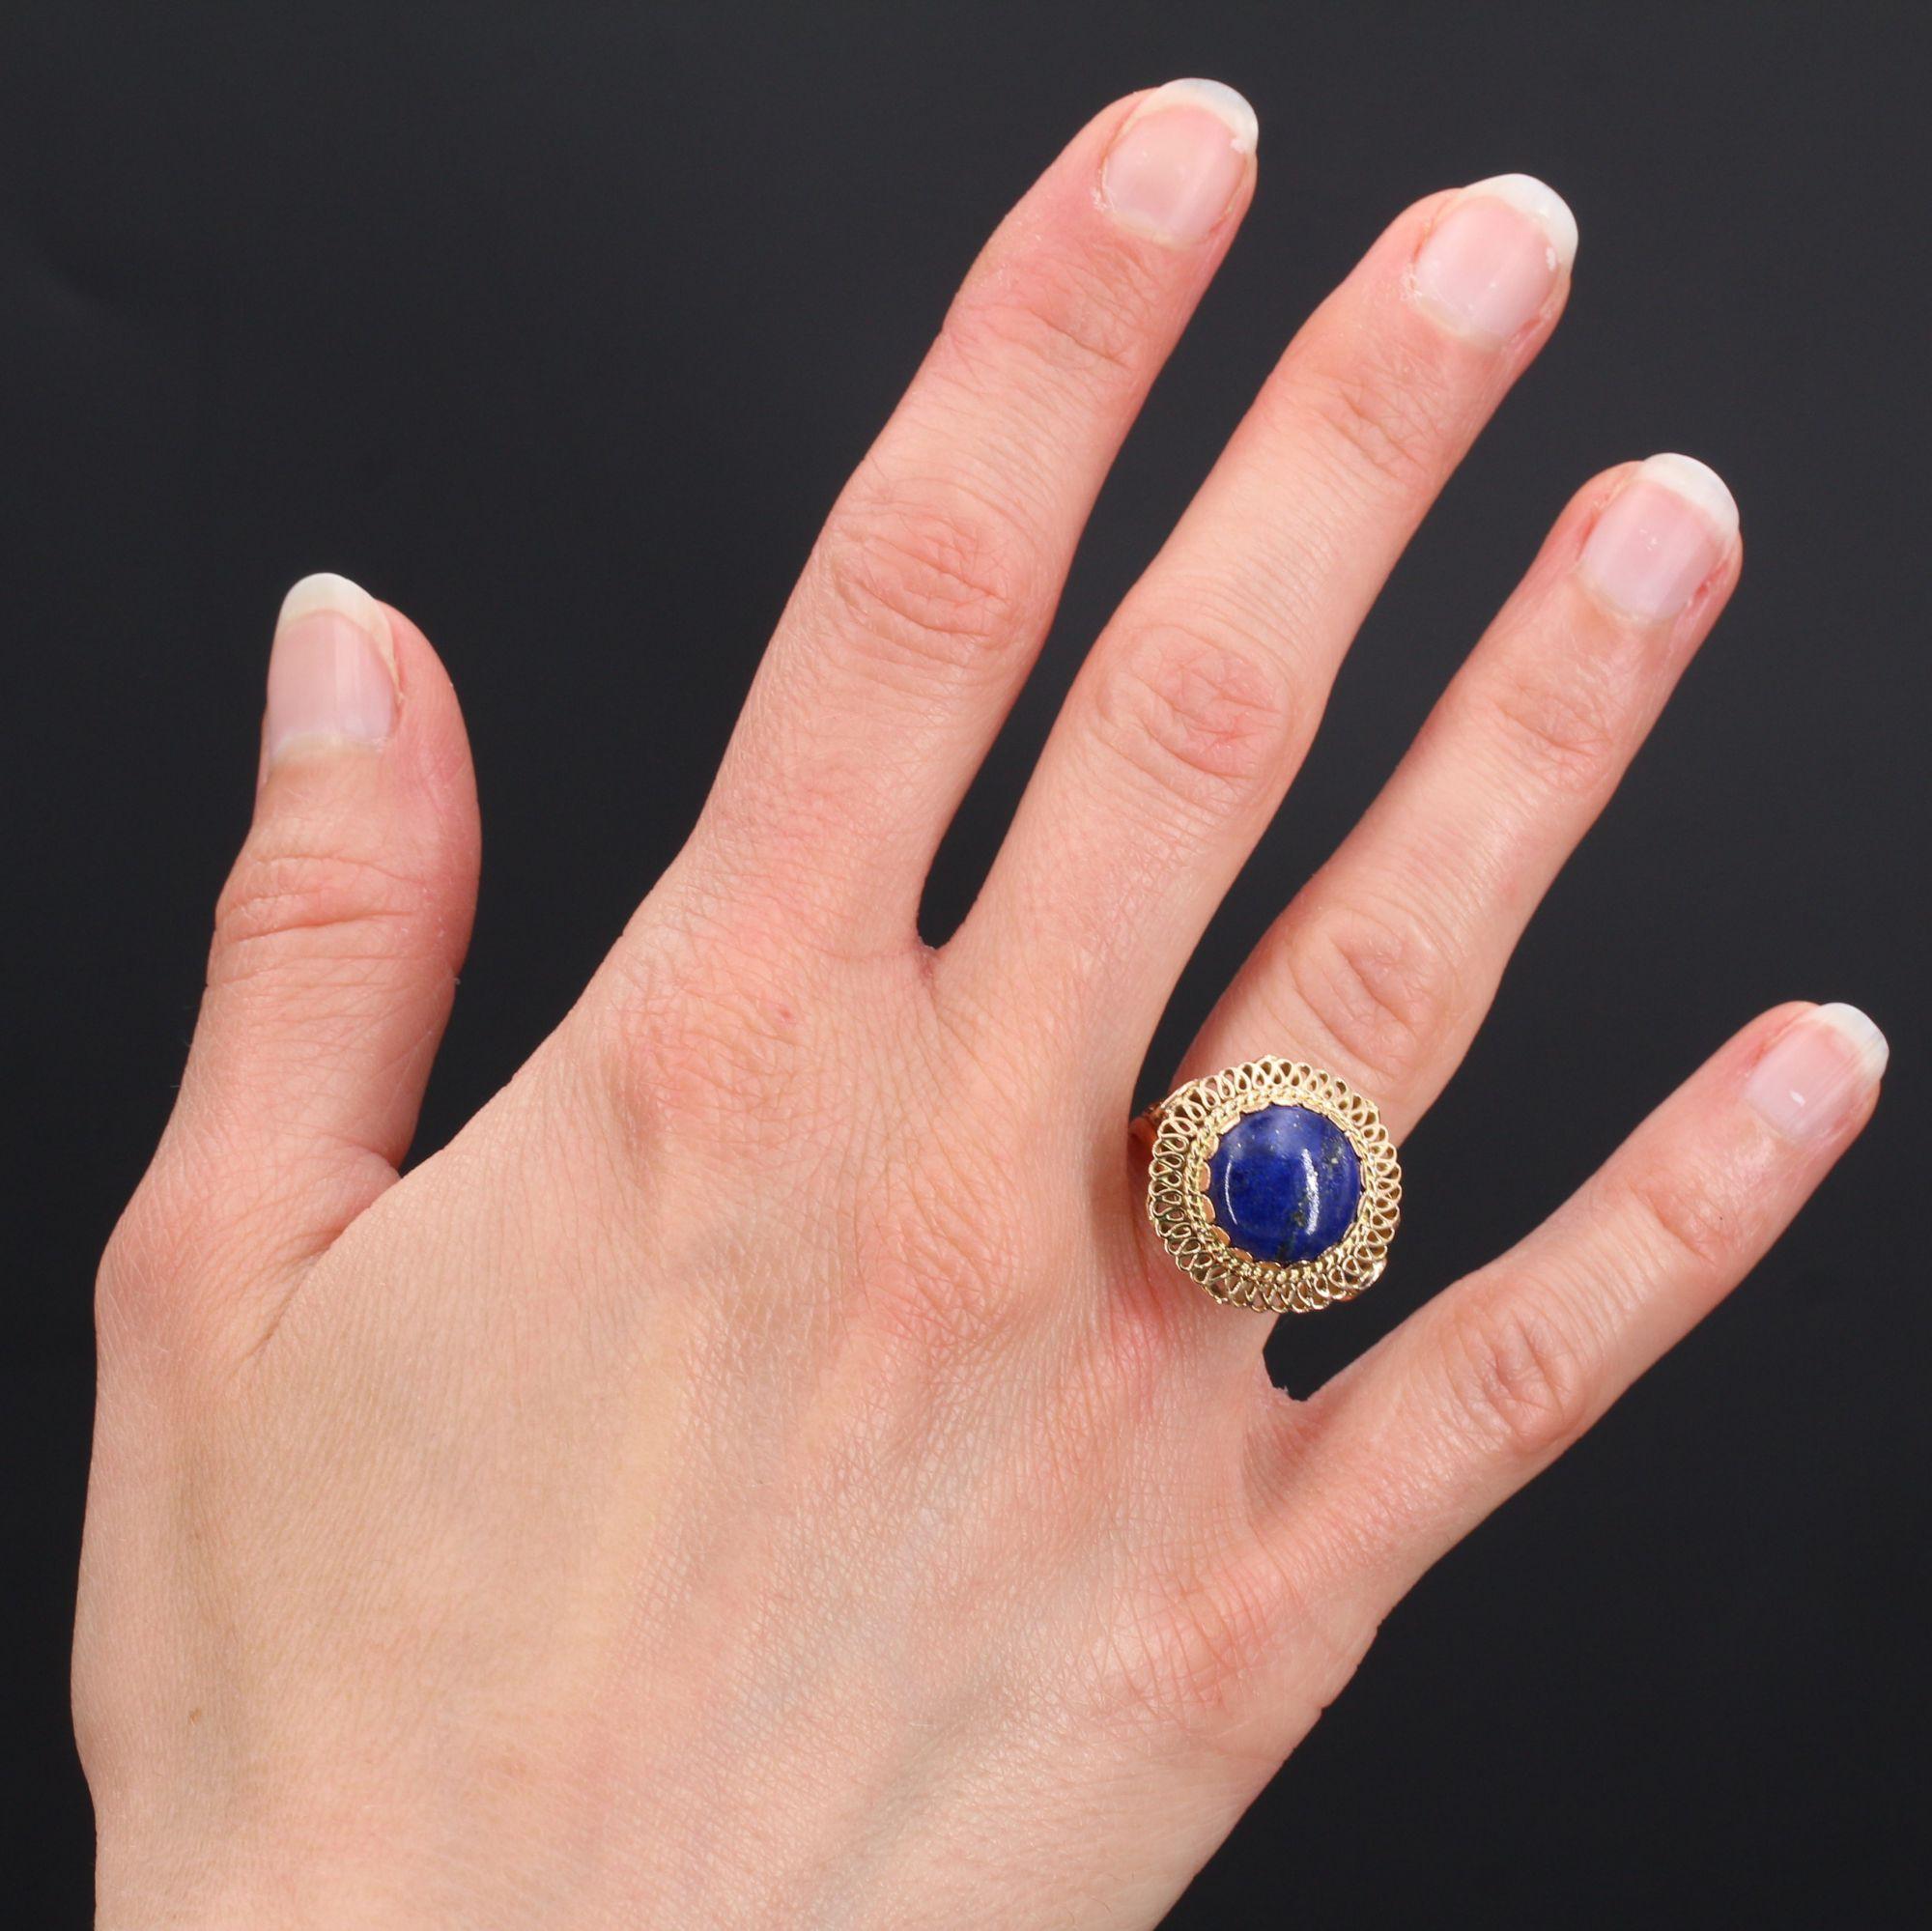 Ring in 18 karat yellow gold, eagle head hallmark.
Magnificent retro ring, it is decorated on its top with a lapis lazuli in petal setting, surrounded by a thin cord on a lace openwork pattern. The departure of the ring is a long loop, the basket is